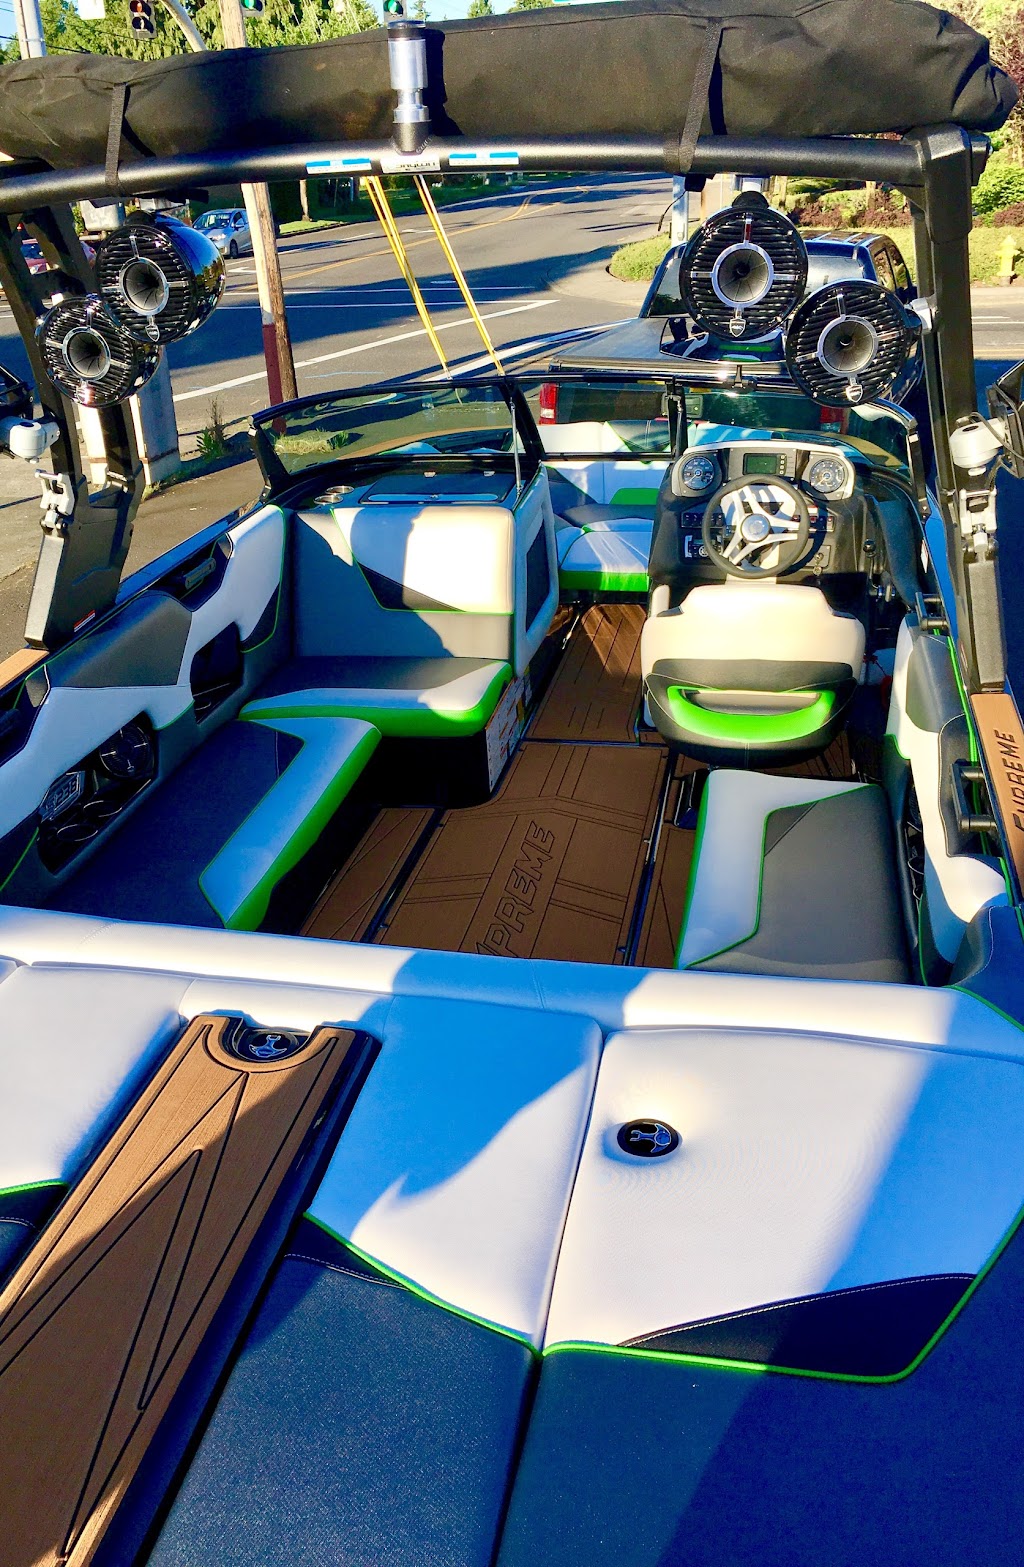 Northwest Boat Sports | 18649 Pacific Hwy E, Oregon City, OR 97045, USA | Phone: (503) 305-5168